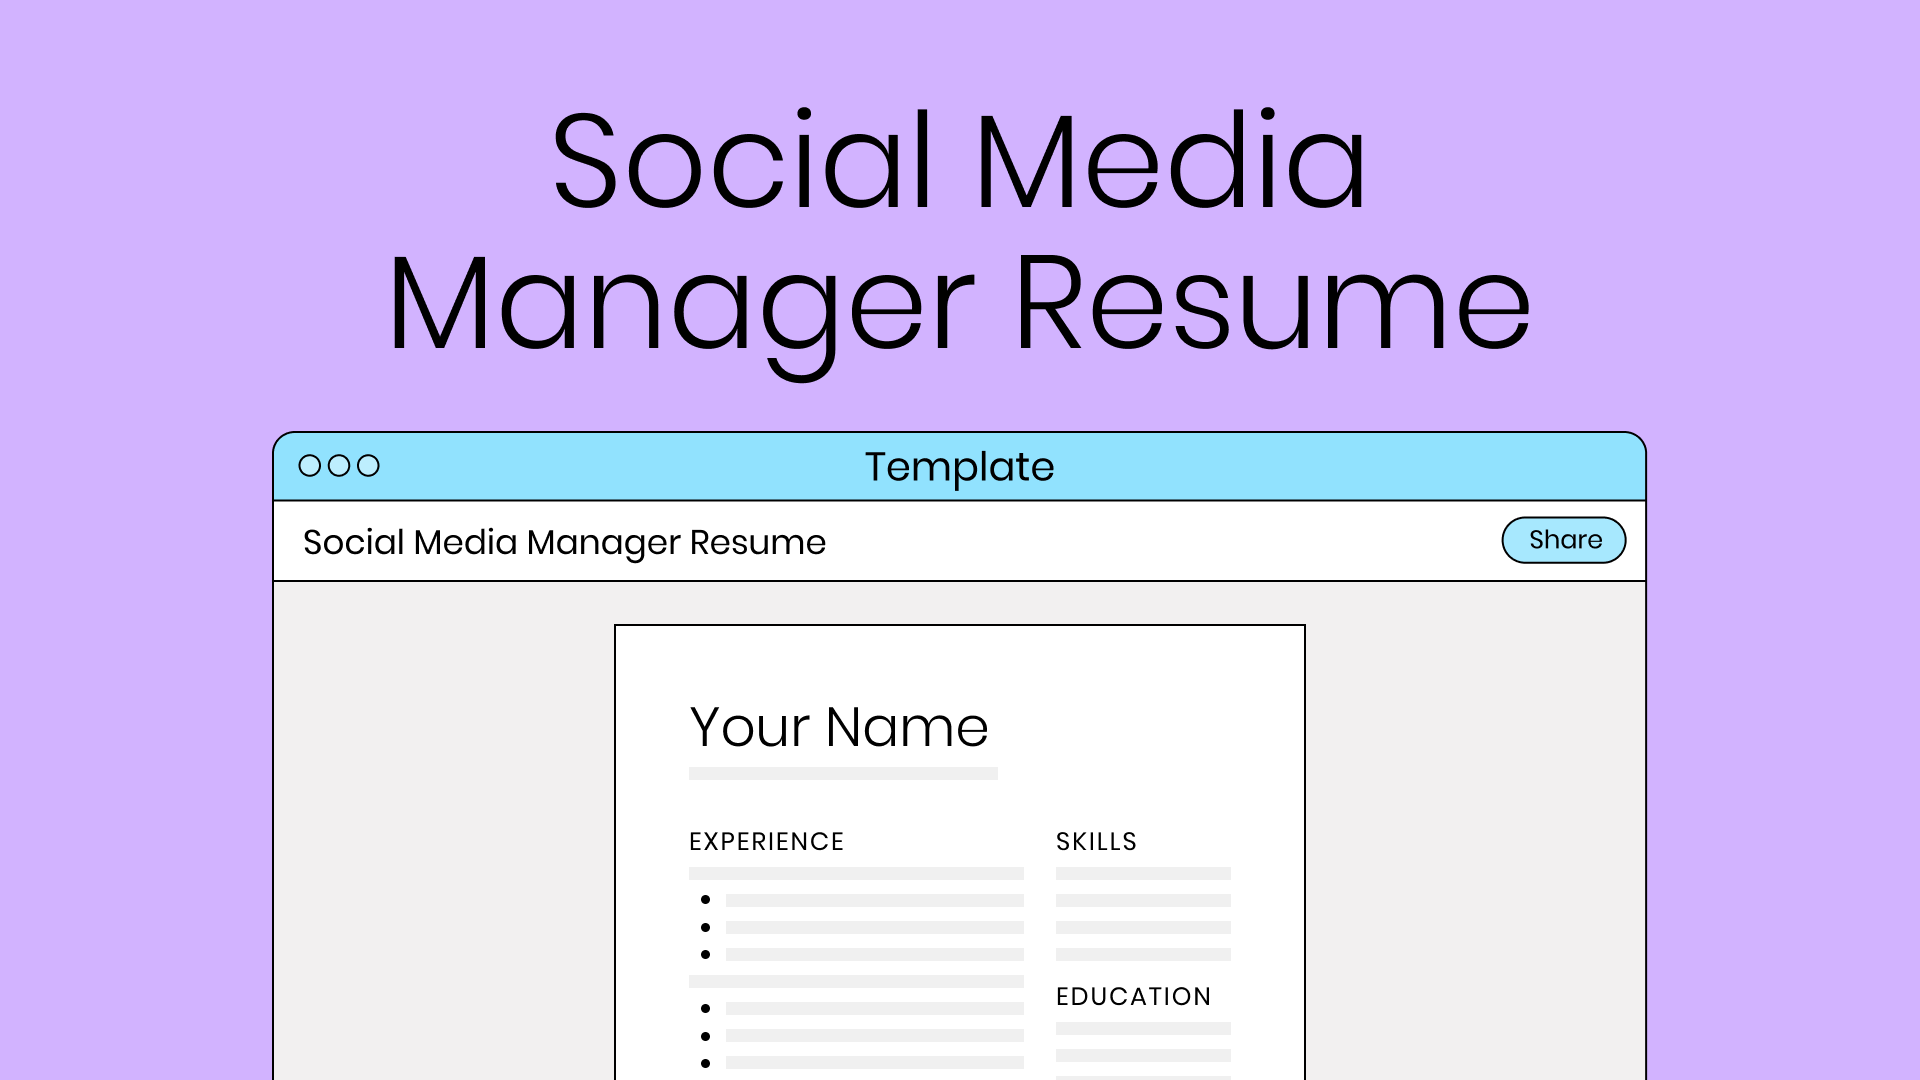 Free Social Media Manager Resume Template to plug in your skills and experience